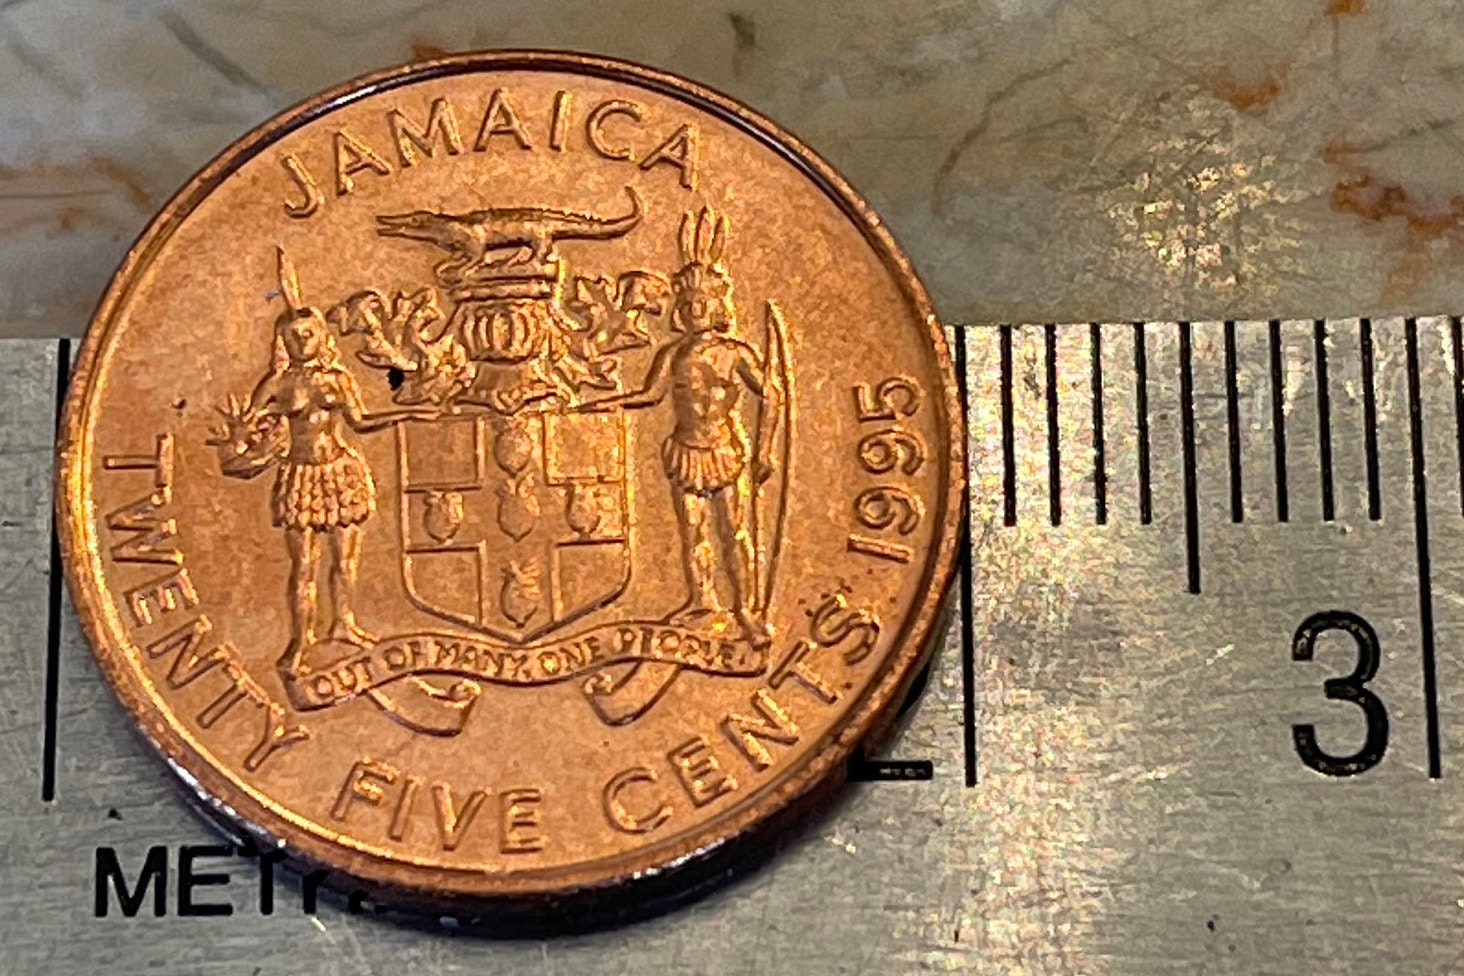 Marcus Garvey Jamaica 25 Cents Authentic Coin Money for Jewelry and Crafts Making (Pan-African) (Black Power) BLM